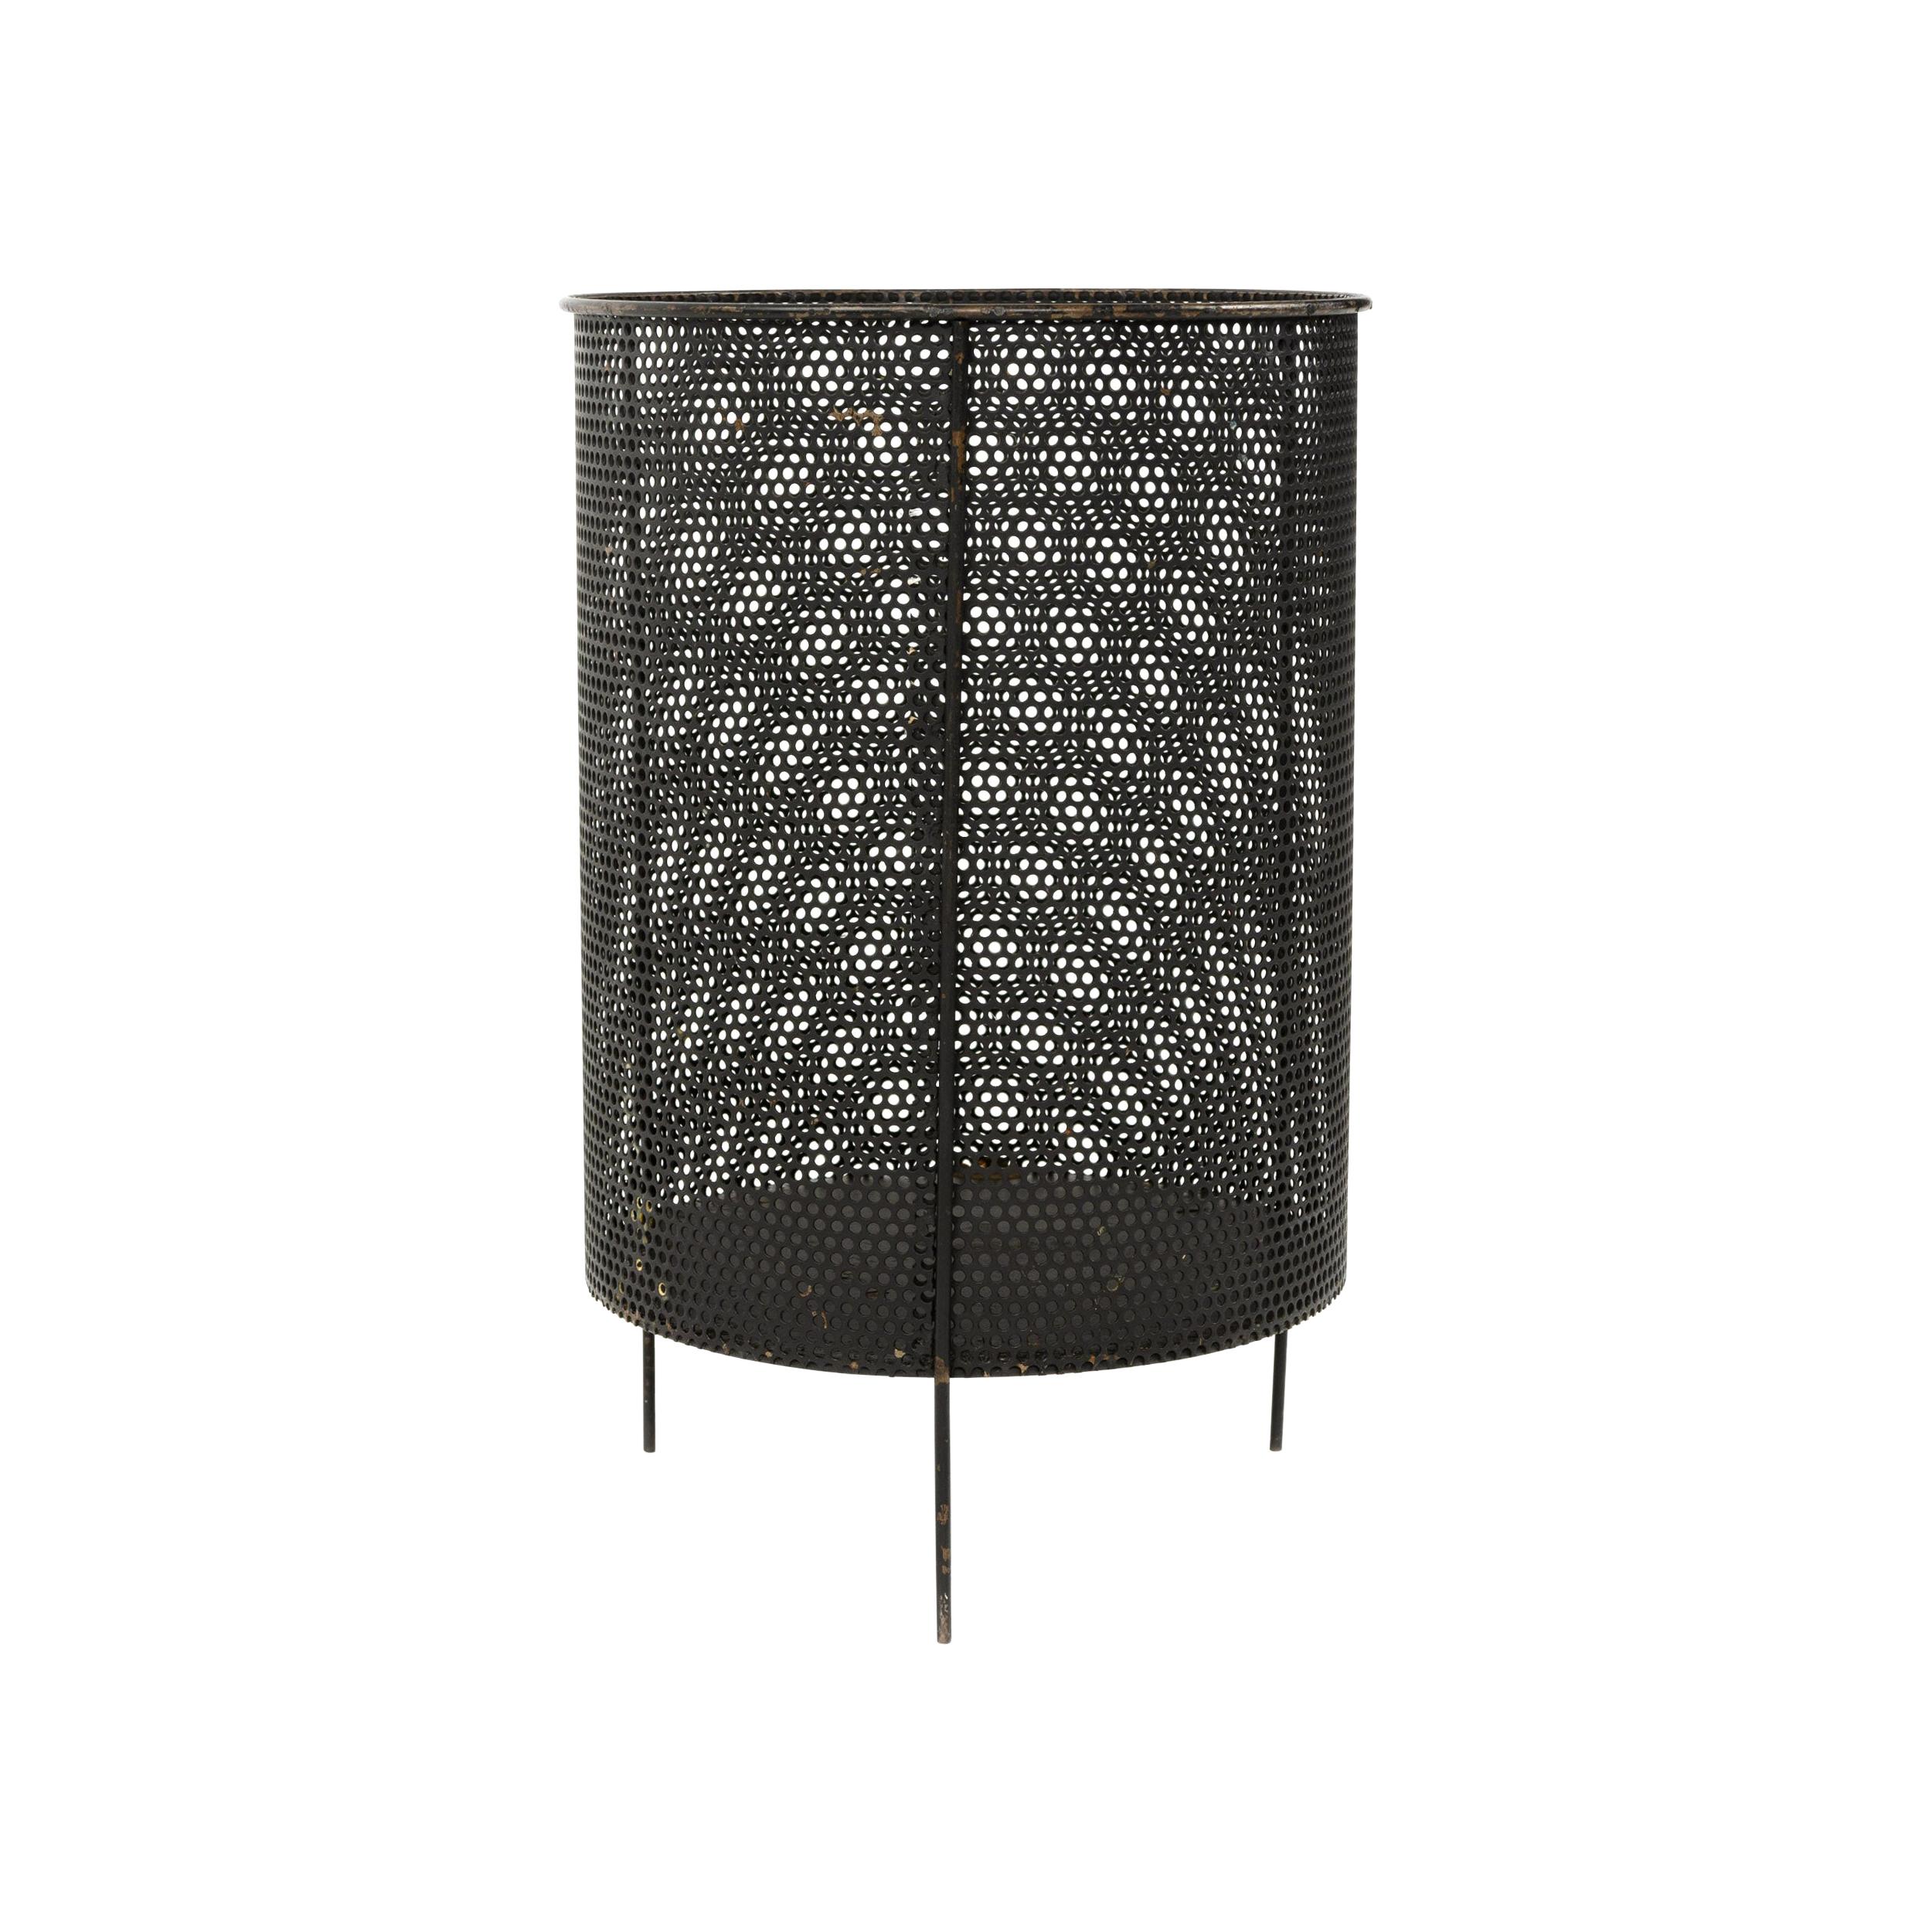 Perforated Steel Waste Basket by Mathieu Mategot